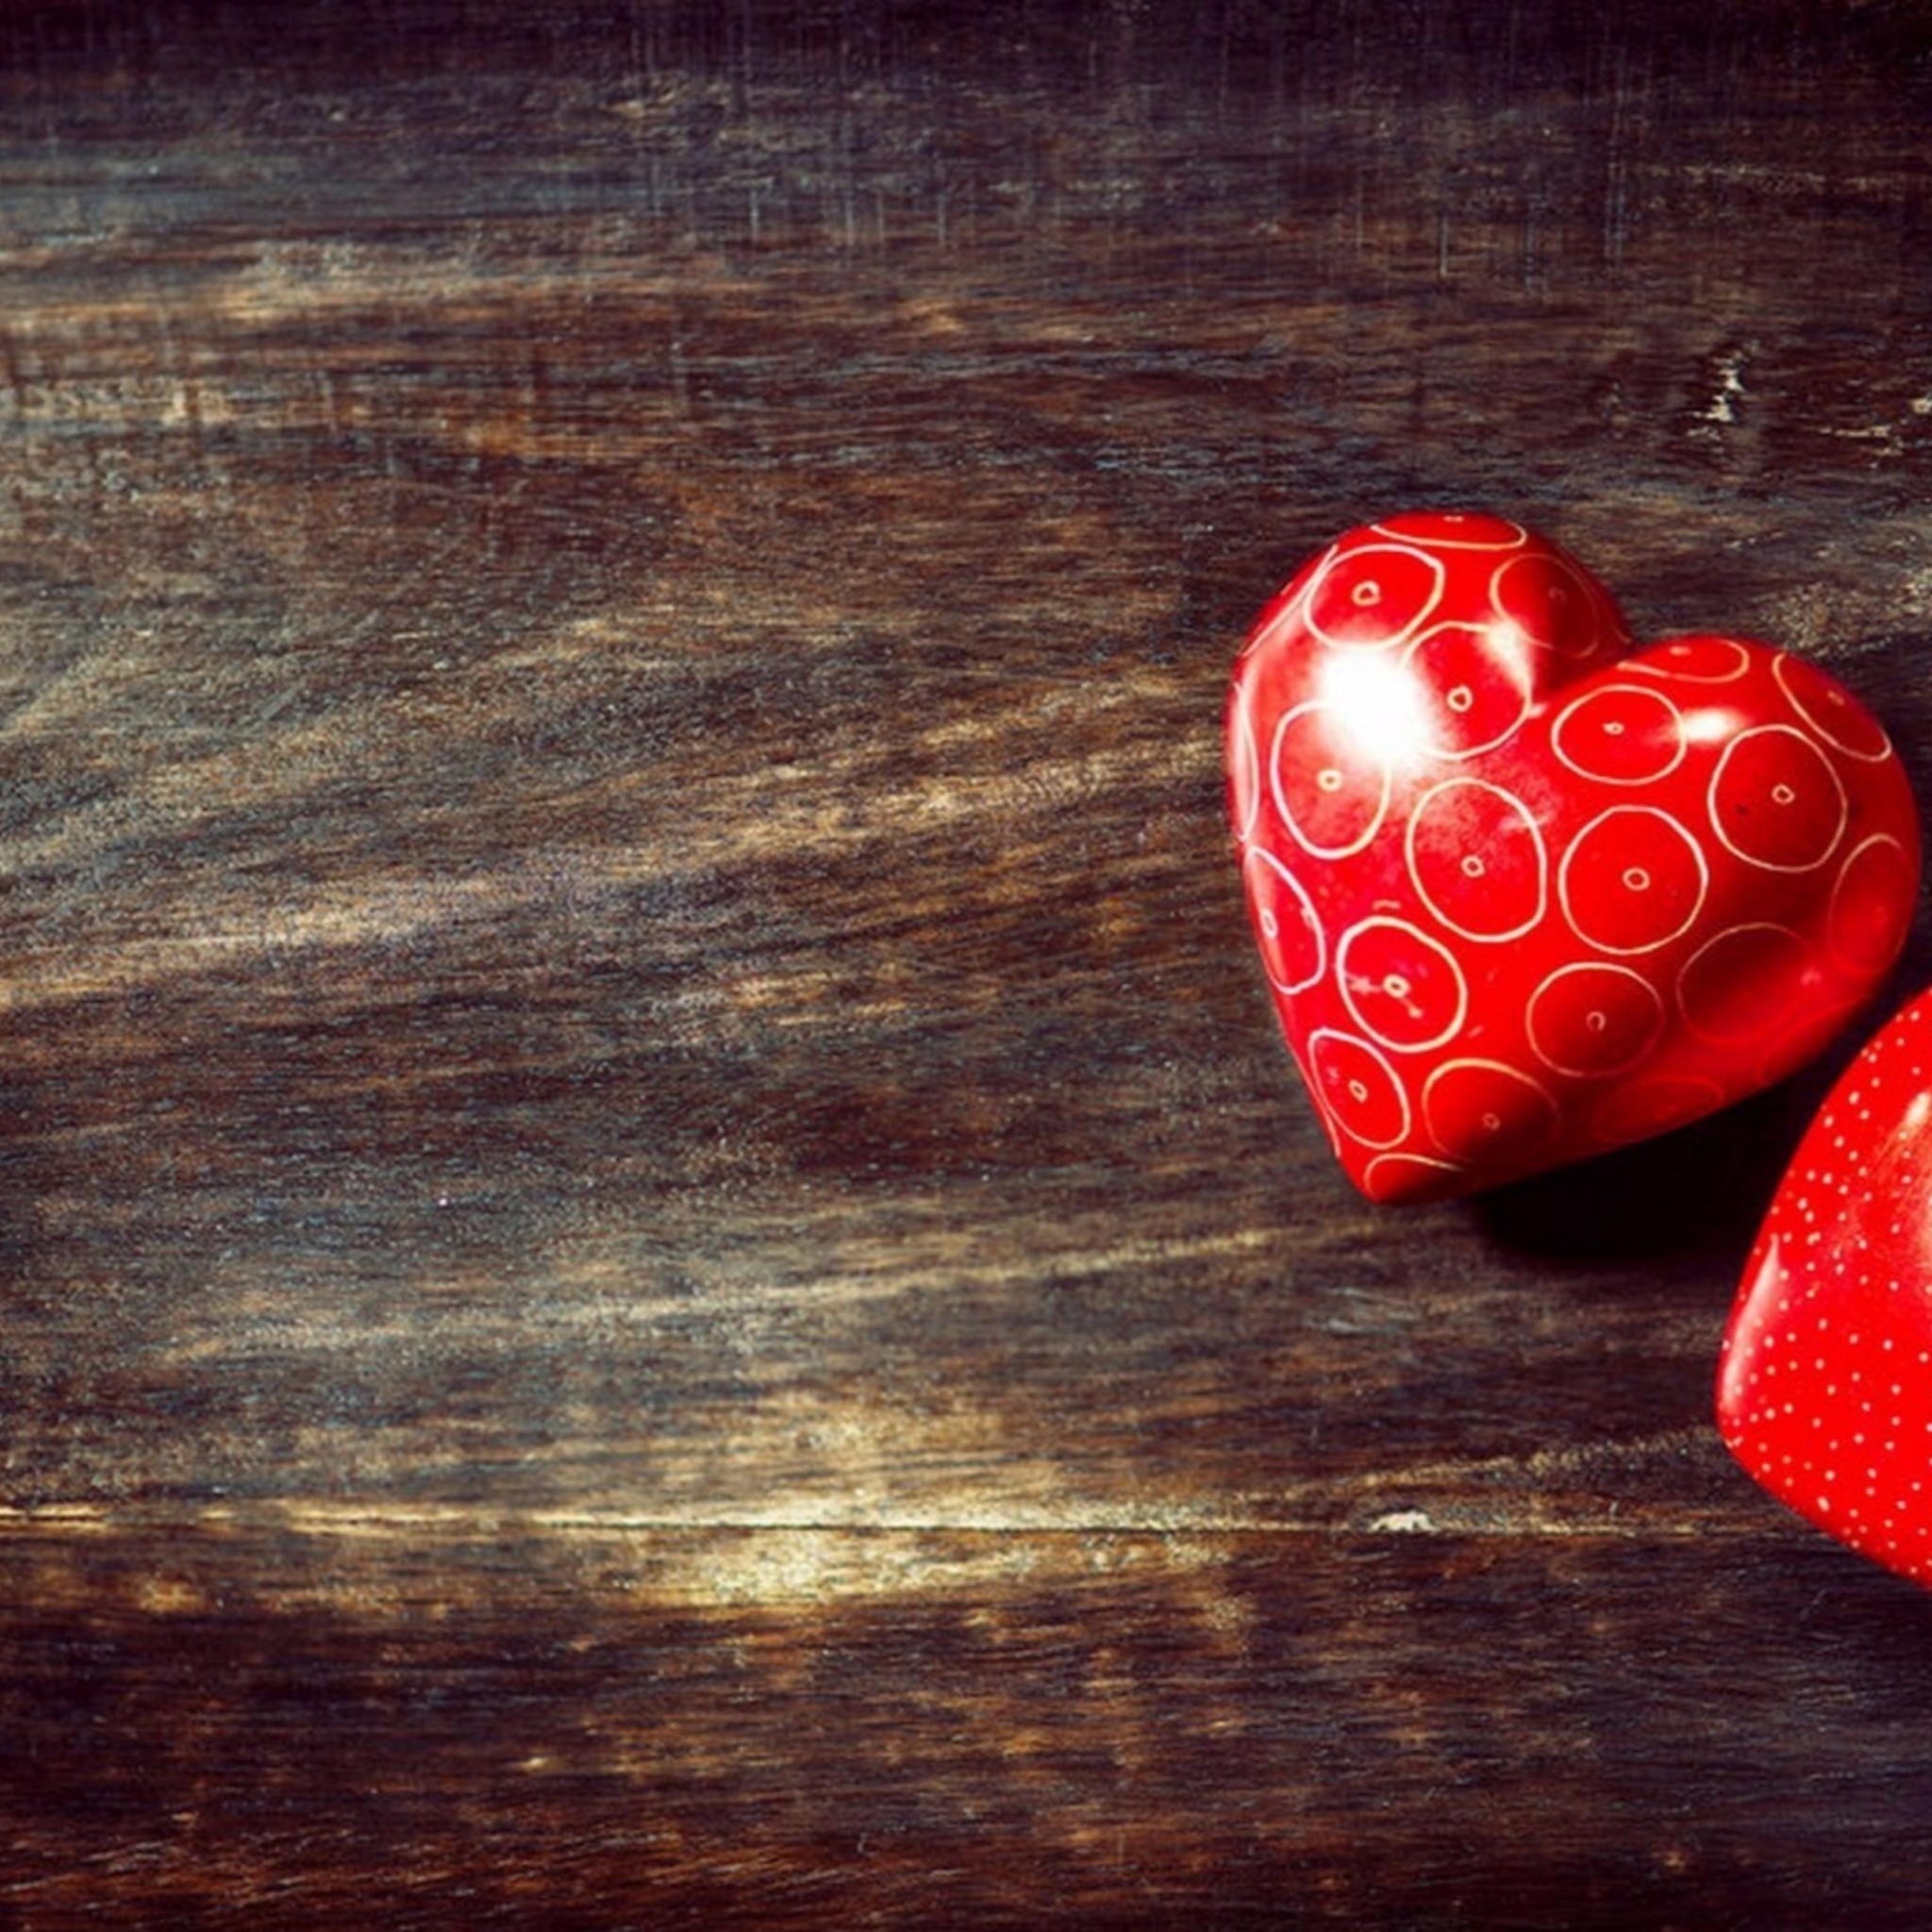 wallpaper related to love,heart,red,love,organ,valentine's day